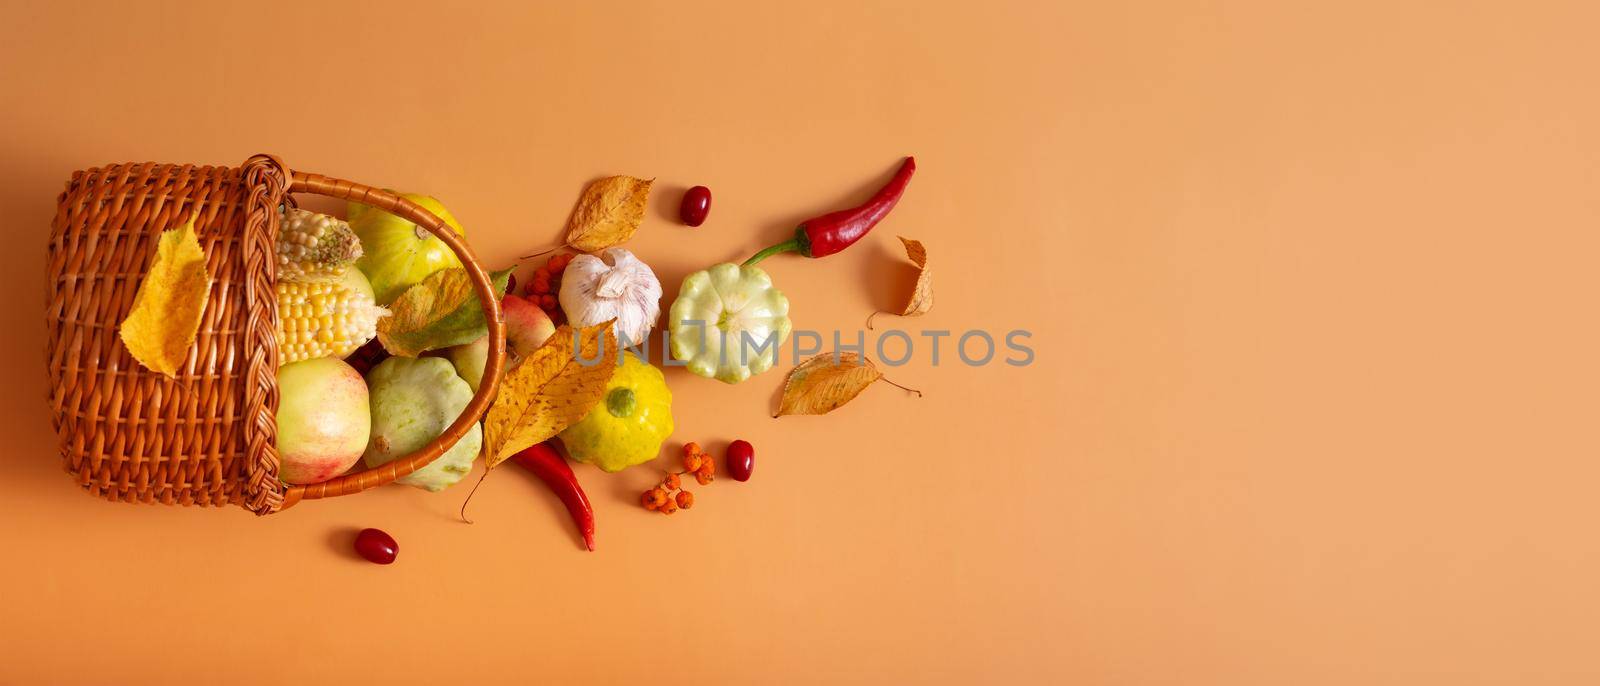 Autumn banner with harvest basket with corn, apples, zucchini and peppers on a orange background top view